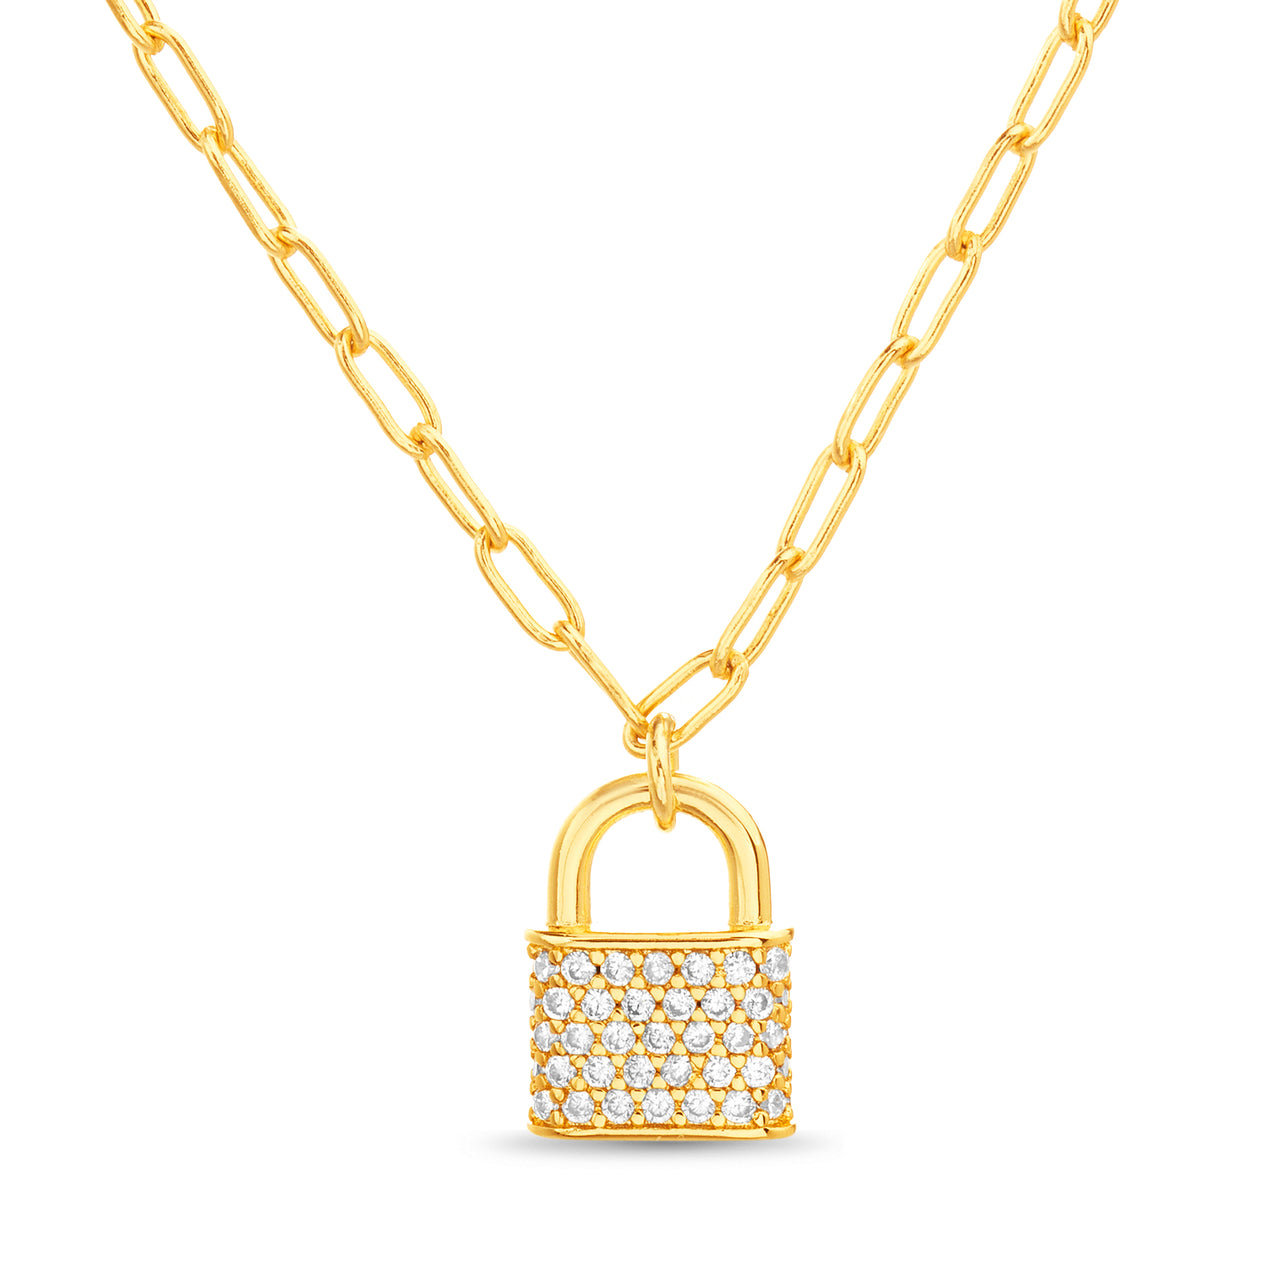 Lesa Michele Lock Necklace Paperclip Chain Necklace in Yellow Gold Plated Sterling Silver with Cubic Zirconia